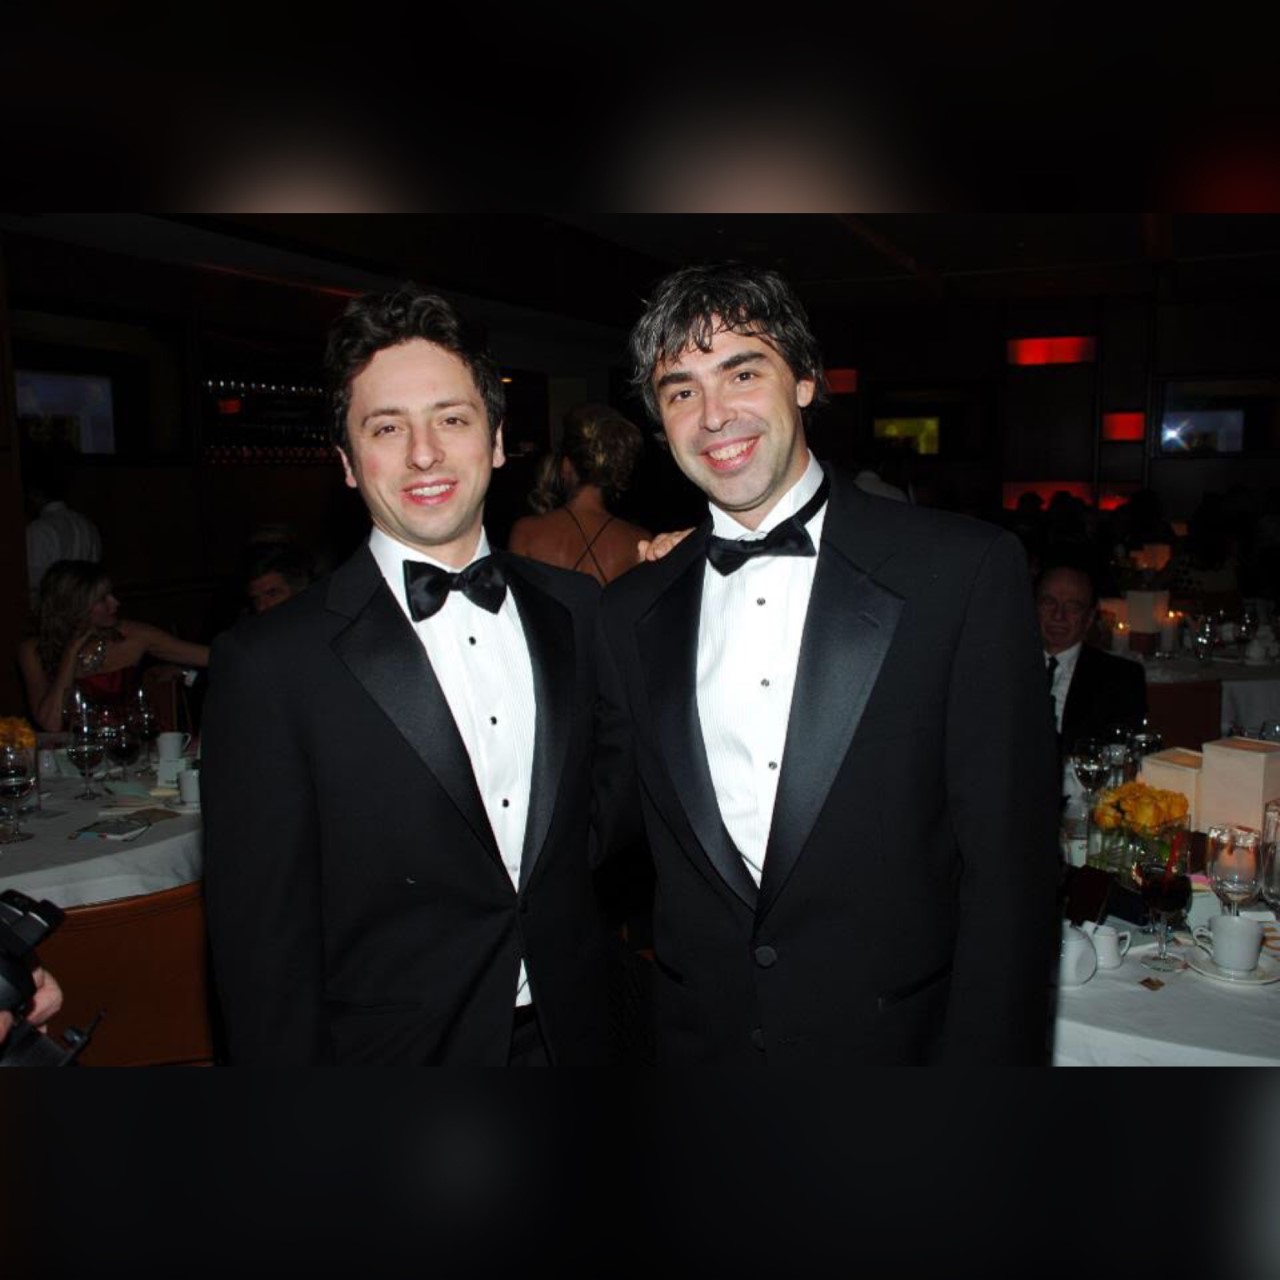 Larry Page & Sergey Brin - Founders of Google